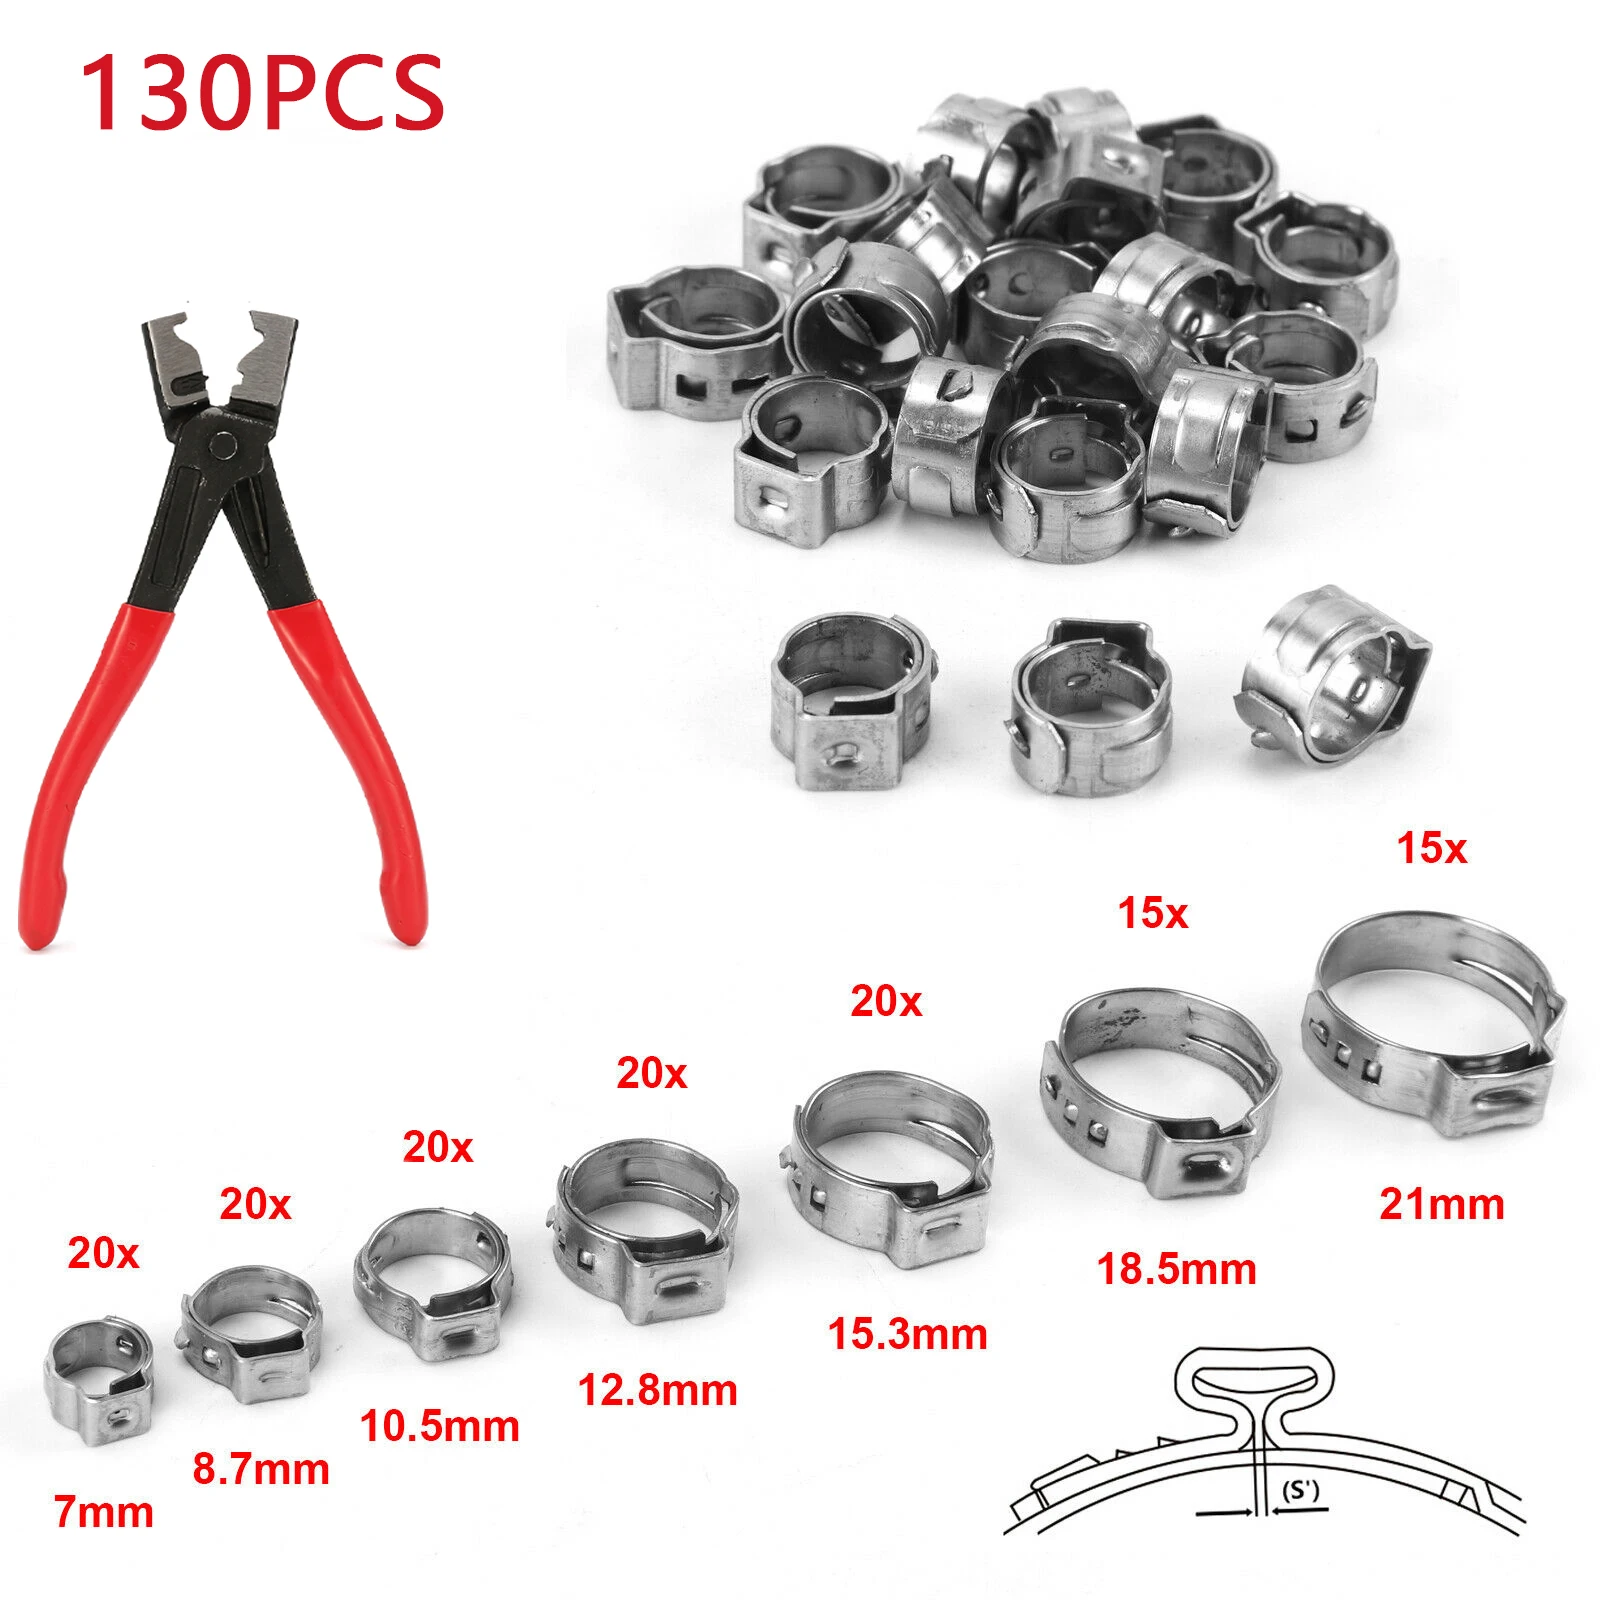 130pcs Single Ear Stepless Hose Clamps +1PC Hose Clip Clamp Pliers 7-21mm 304 Stainless Steel Hose Clamps Cinch Clamp Rings